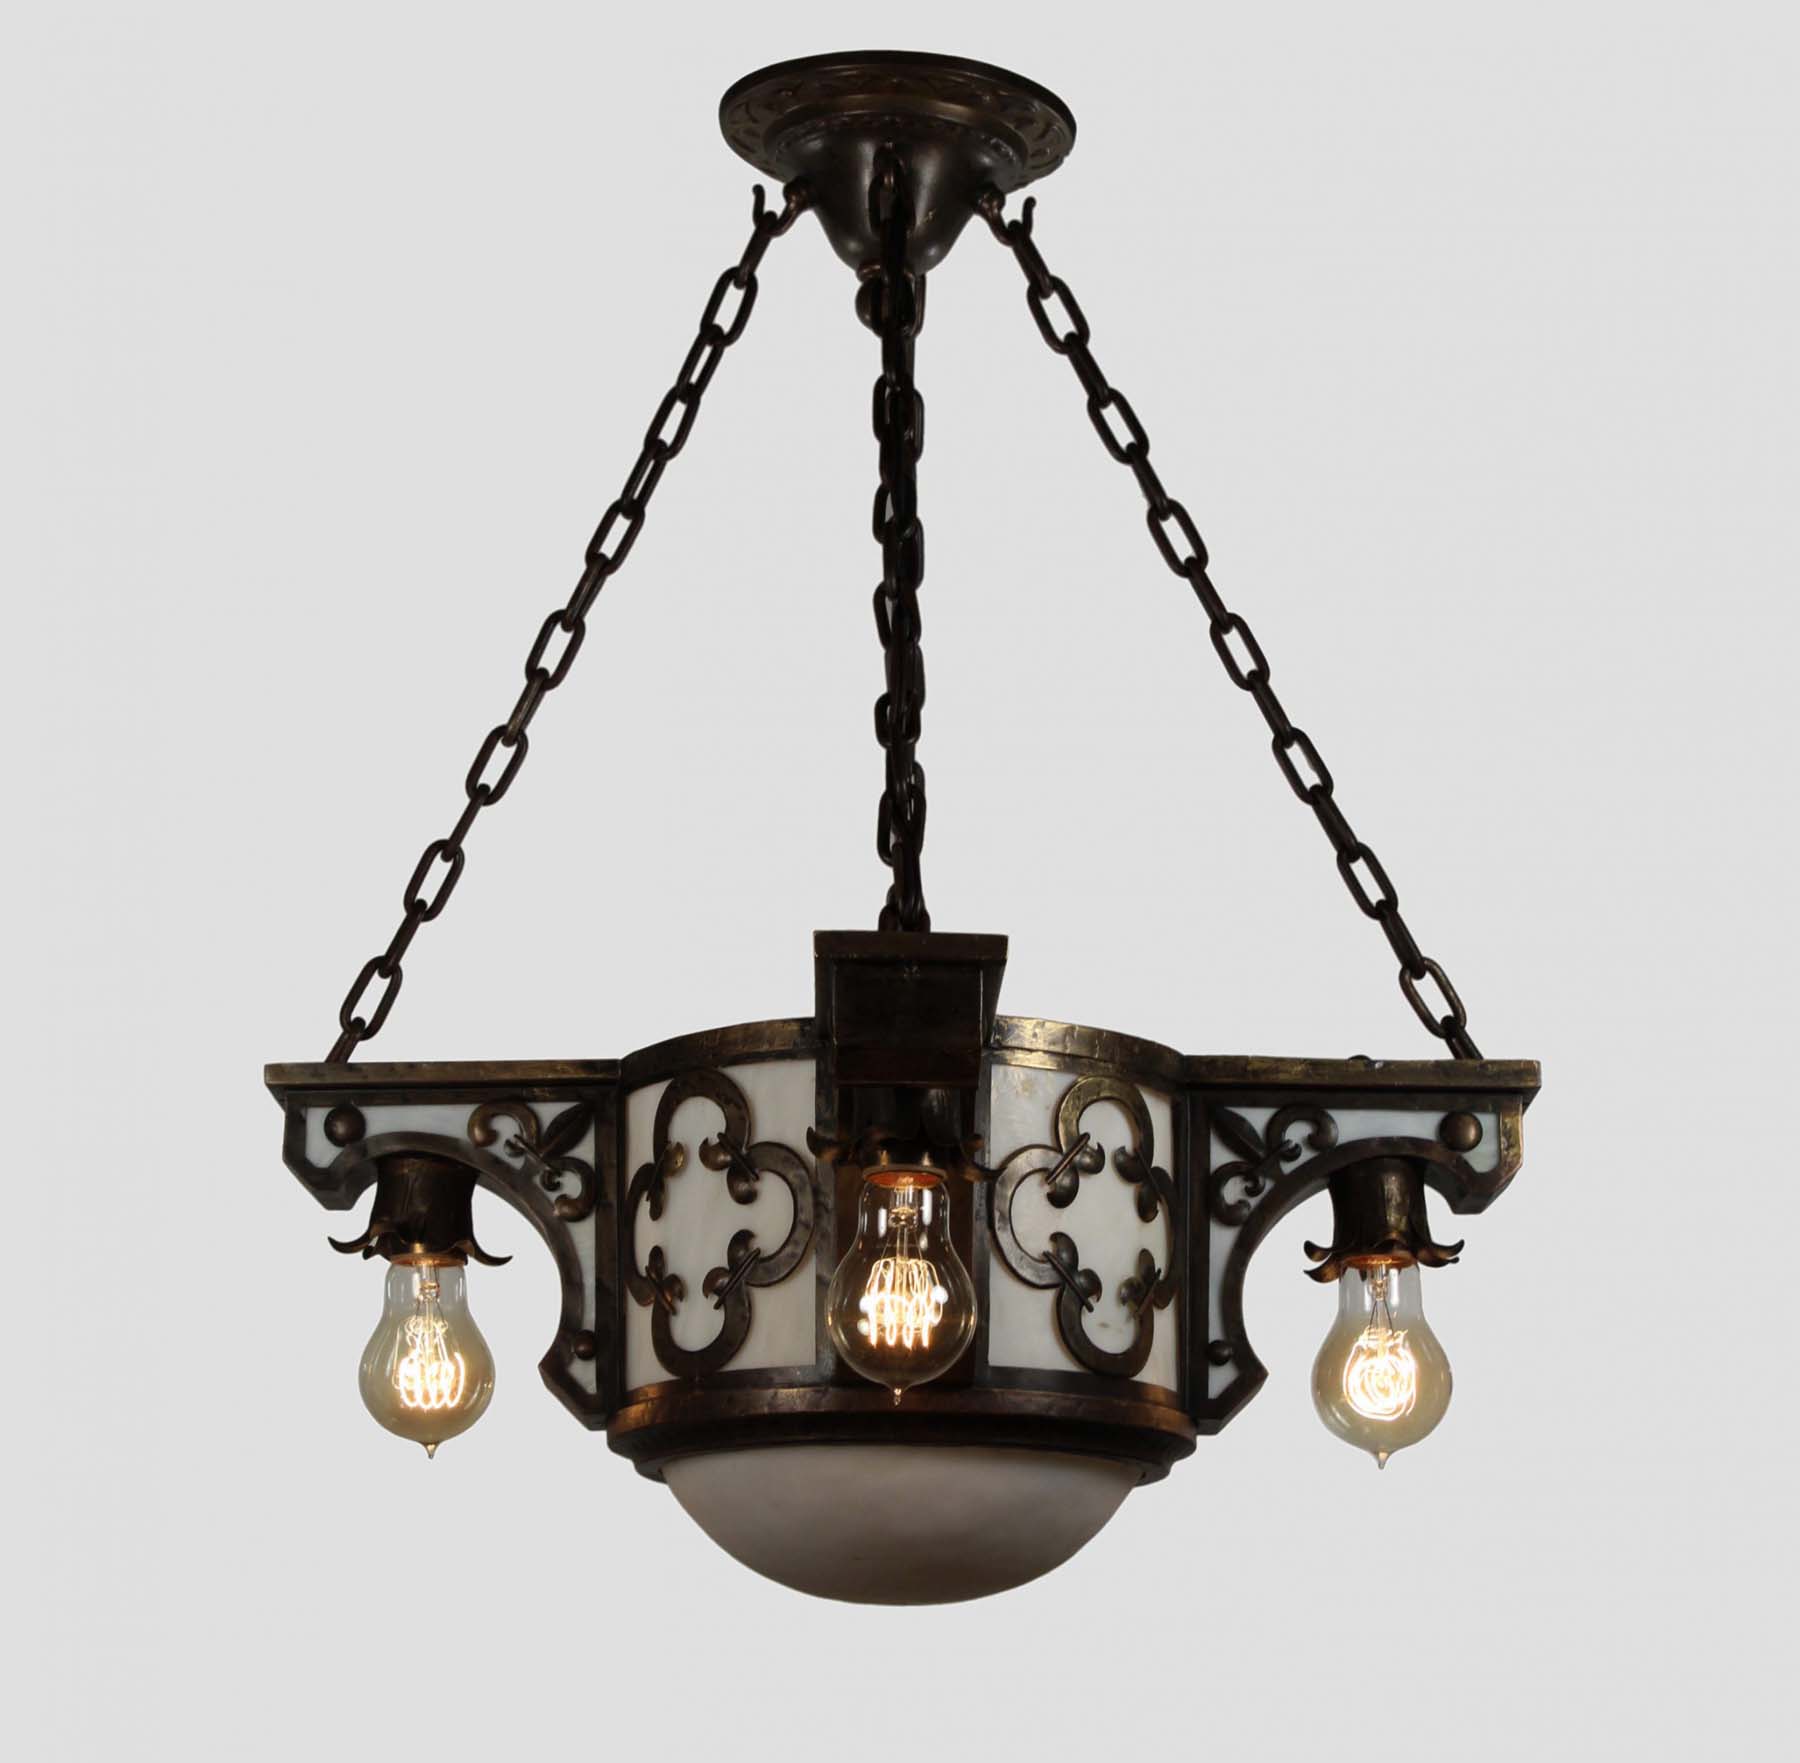 Antique Inverted Dome Chandelier, Gothic Revival-68735